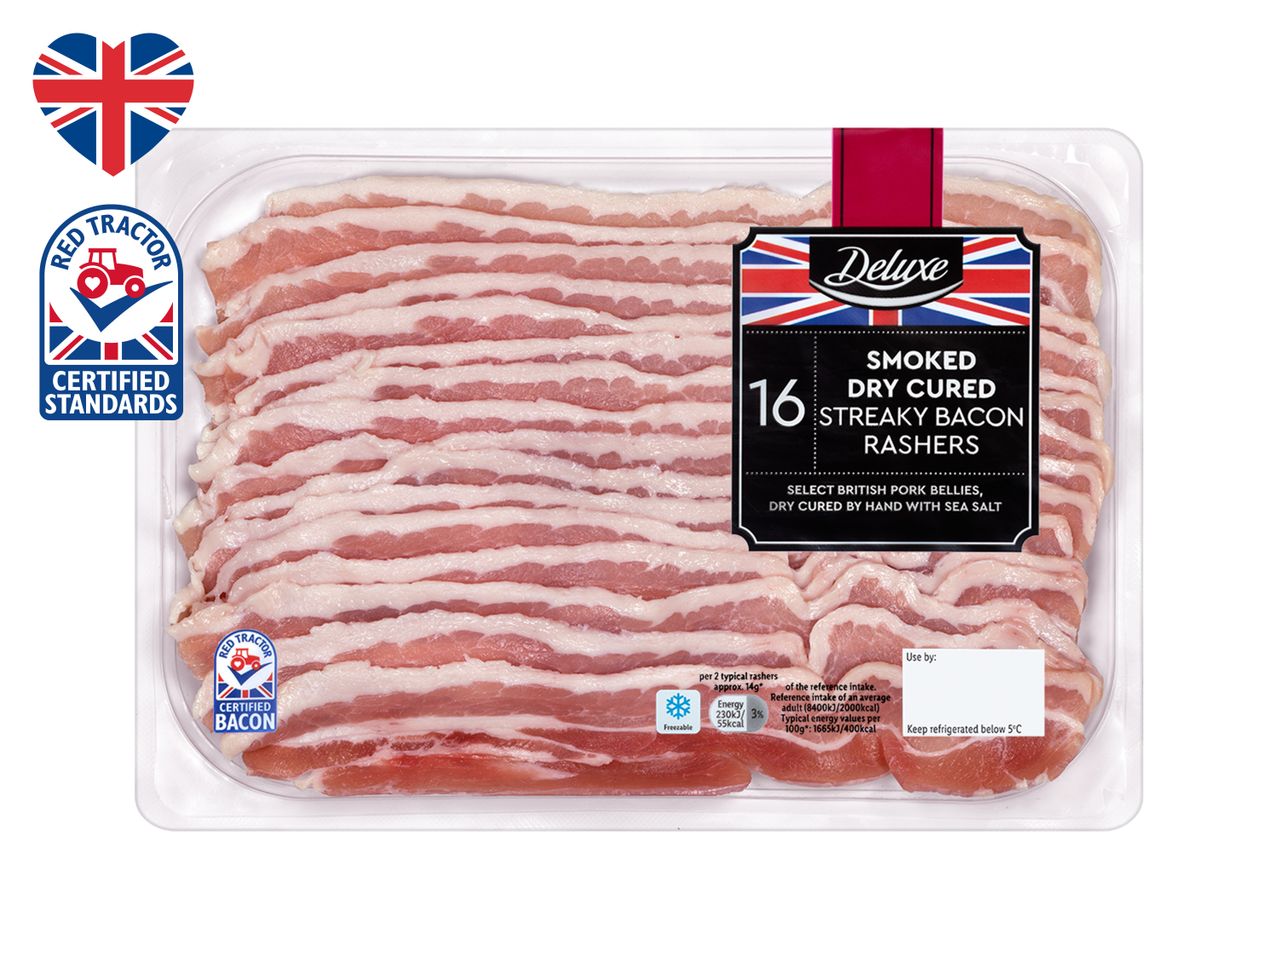 Go to full screen view: Deluxe RSPCA Dry Cured Streaky Bacon - Image 1